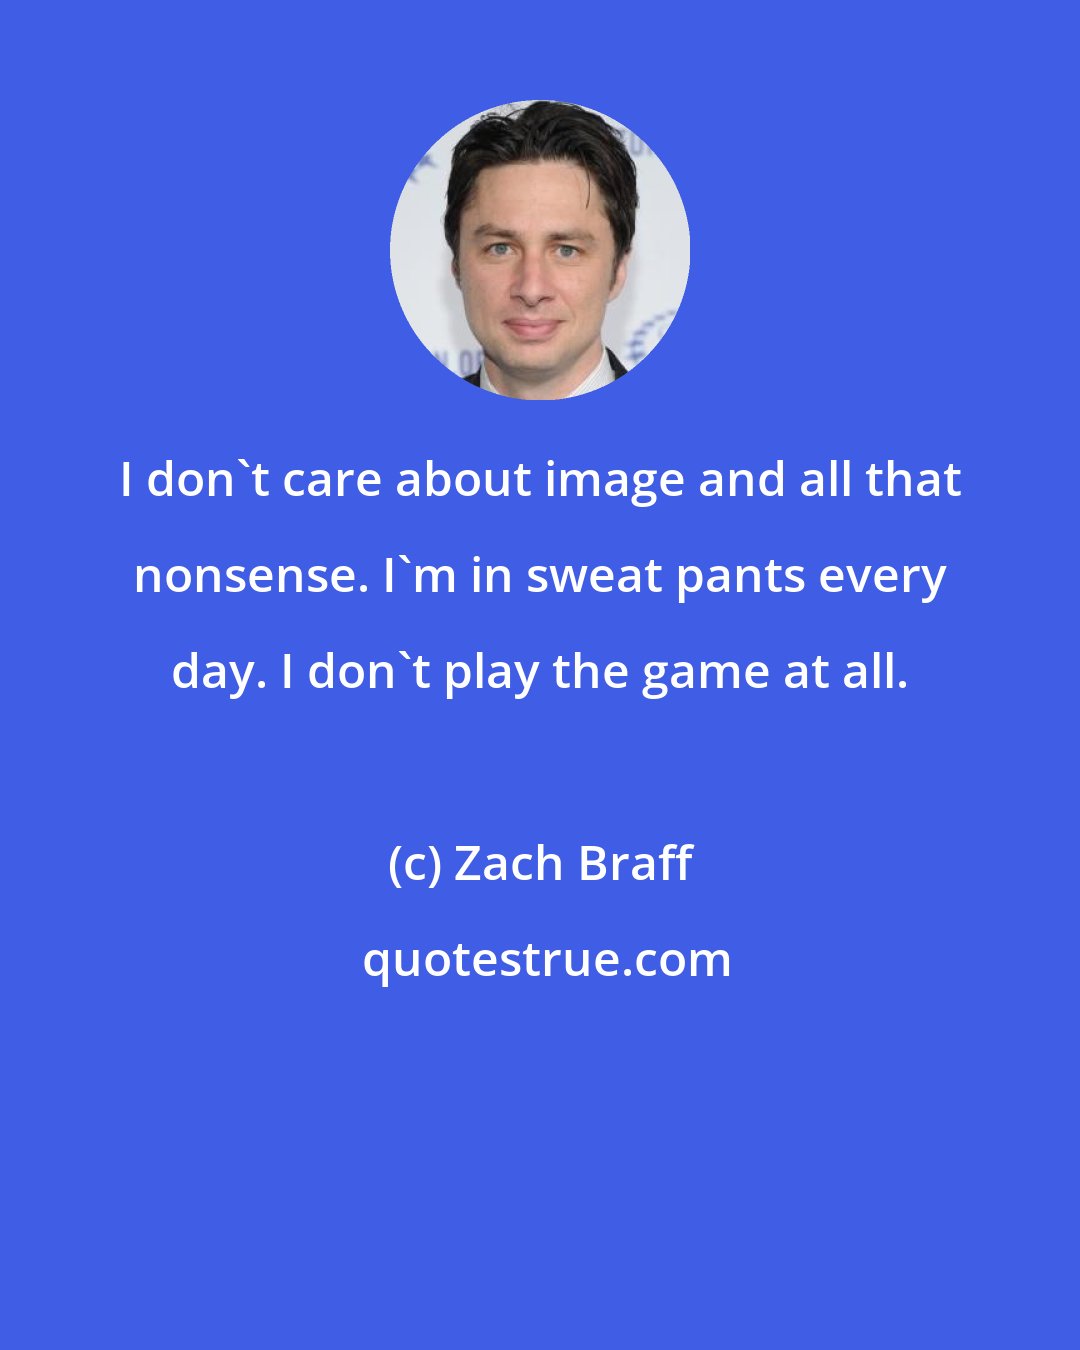 Zach Braff: I don't care about image and all that nonsense. I'm in sweat pants every day. I don't play the game at all.